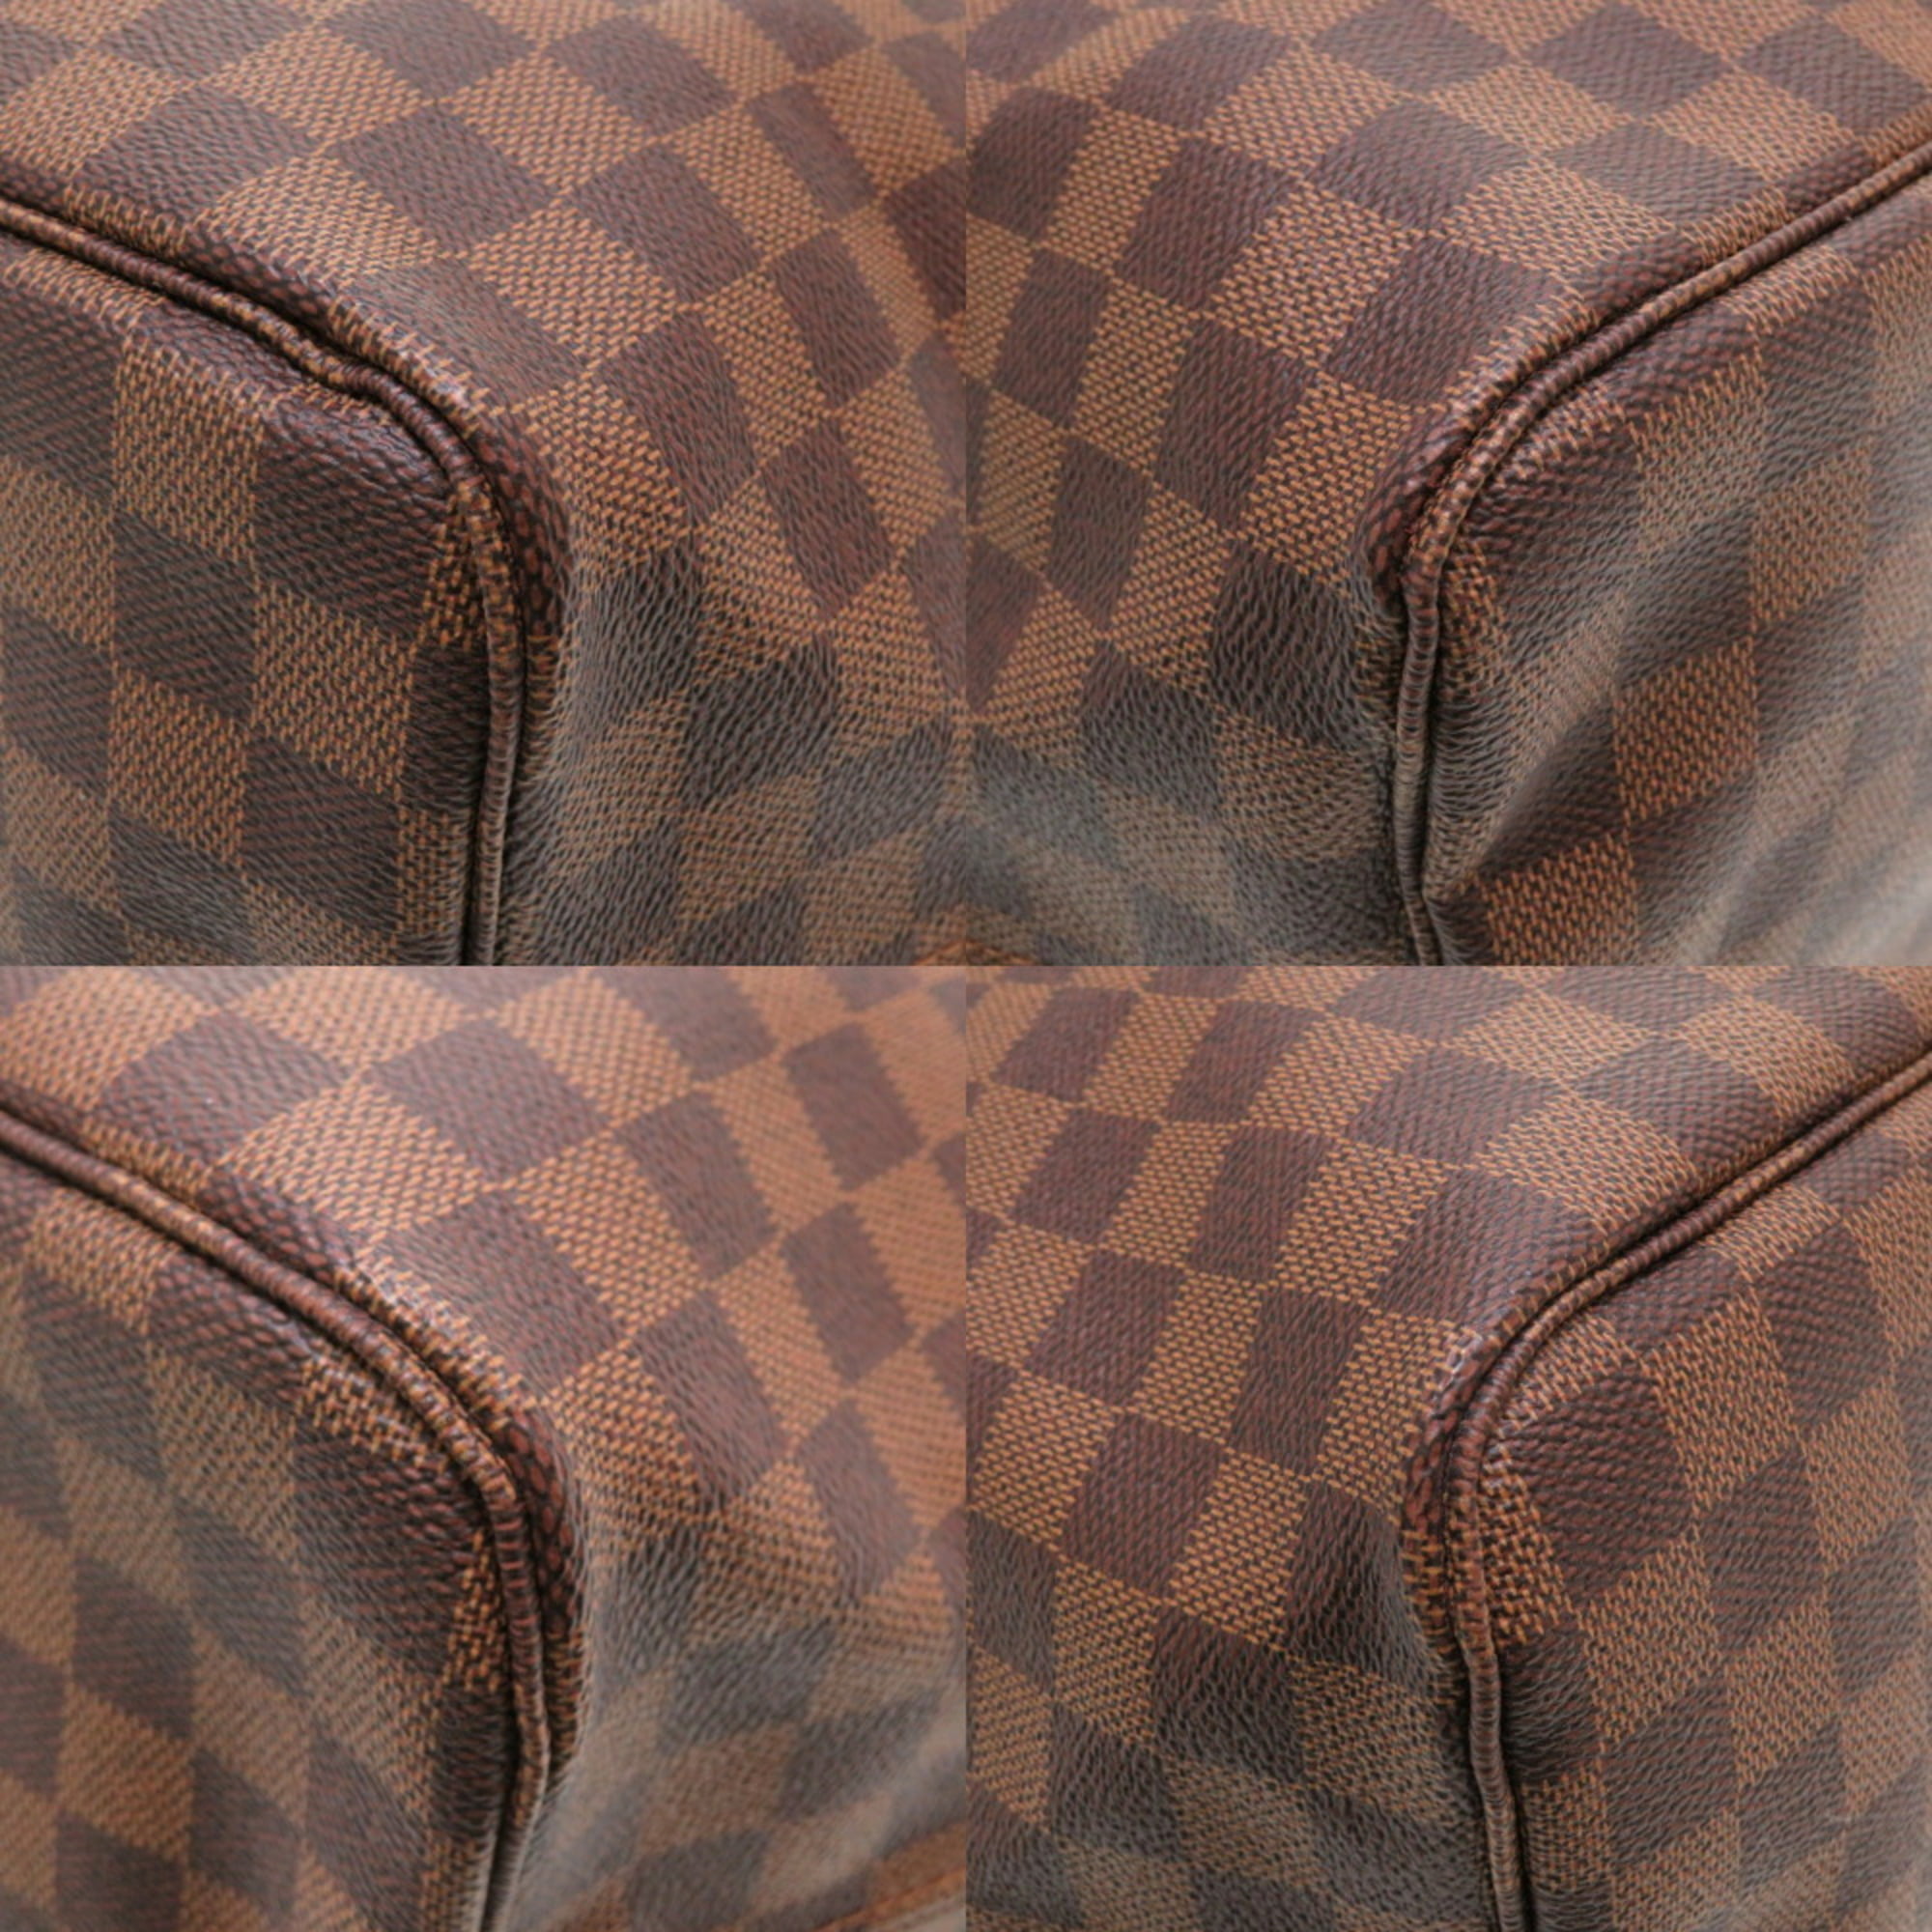 Louis-Vuitton-Damier-Ebene-Neverfull-GM-Tote-Bag-N51106 – dct-ep_vintage  luxury Store